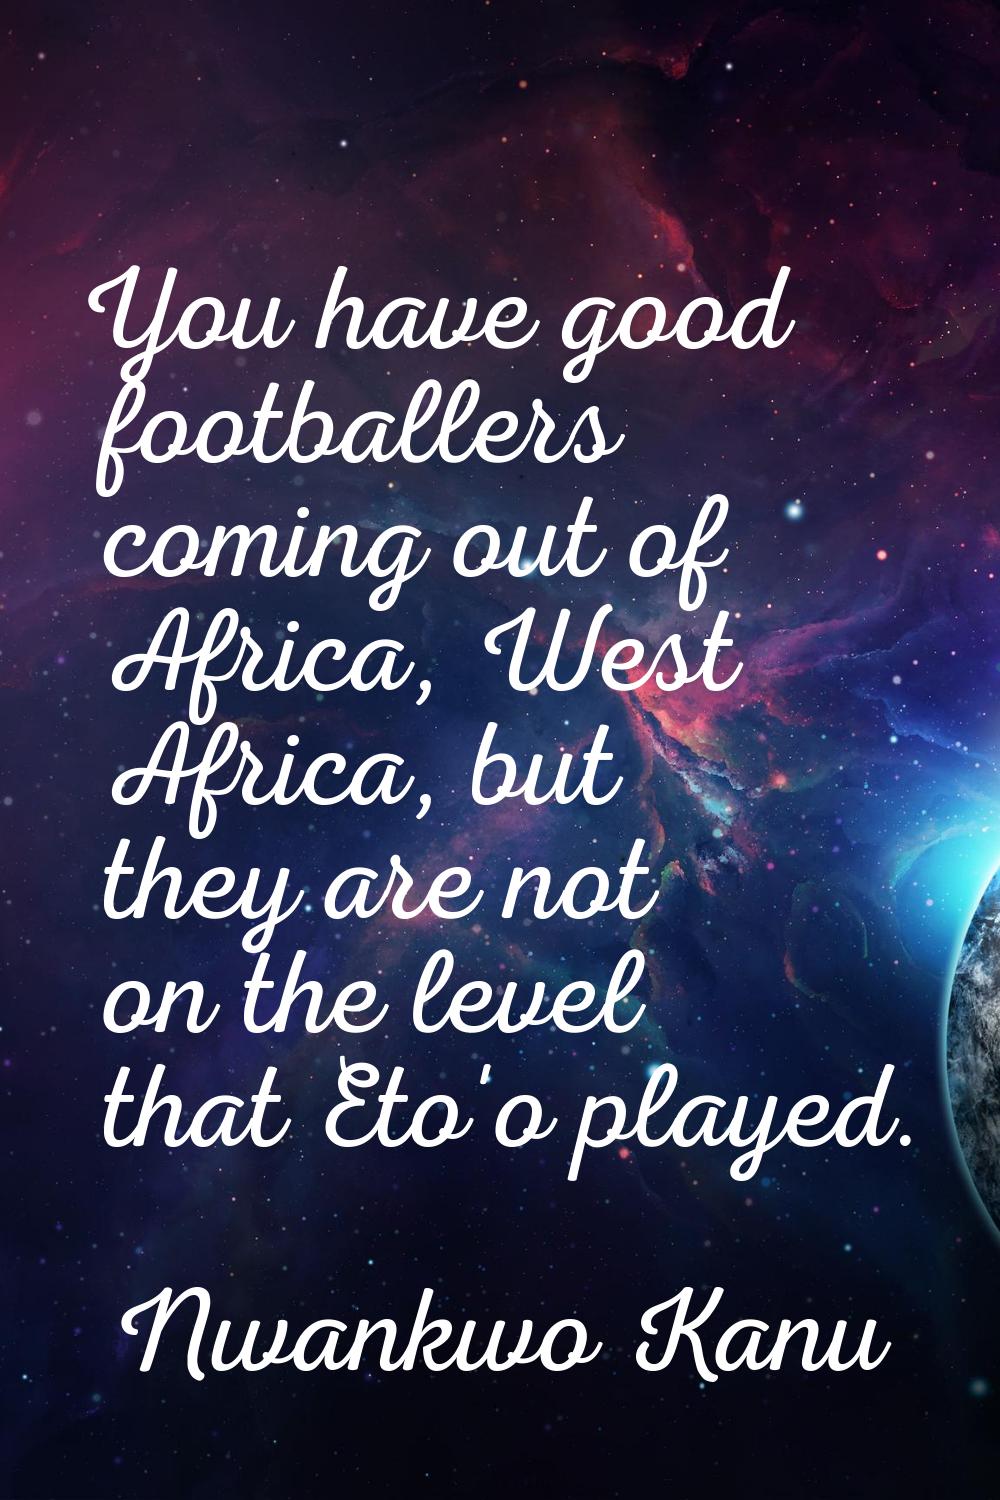 You have good footballers coming out of Africa, West Africa, but they are not on the level that Eto